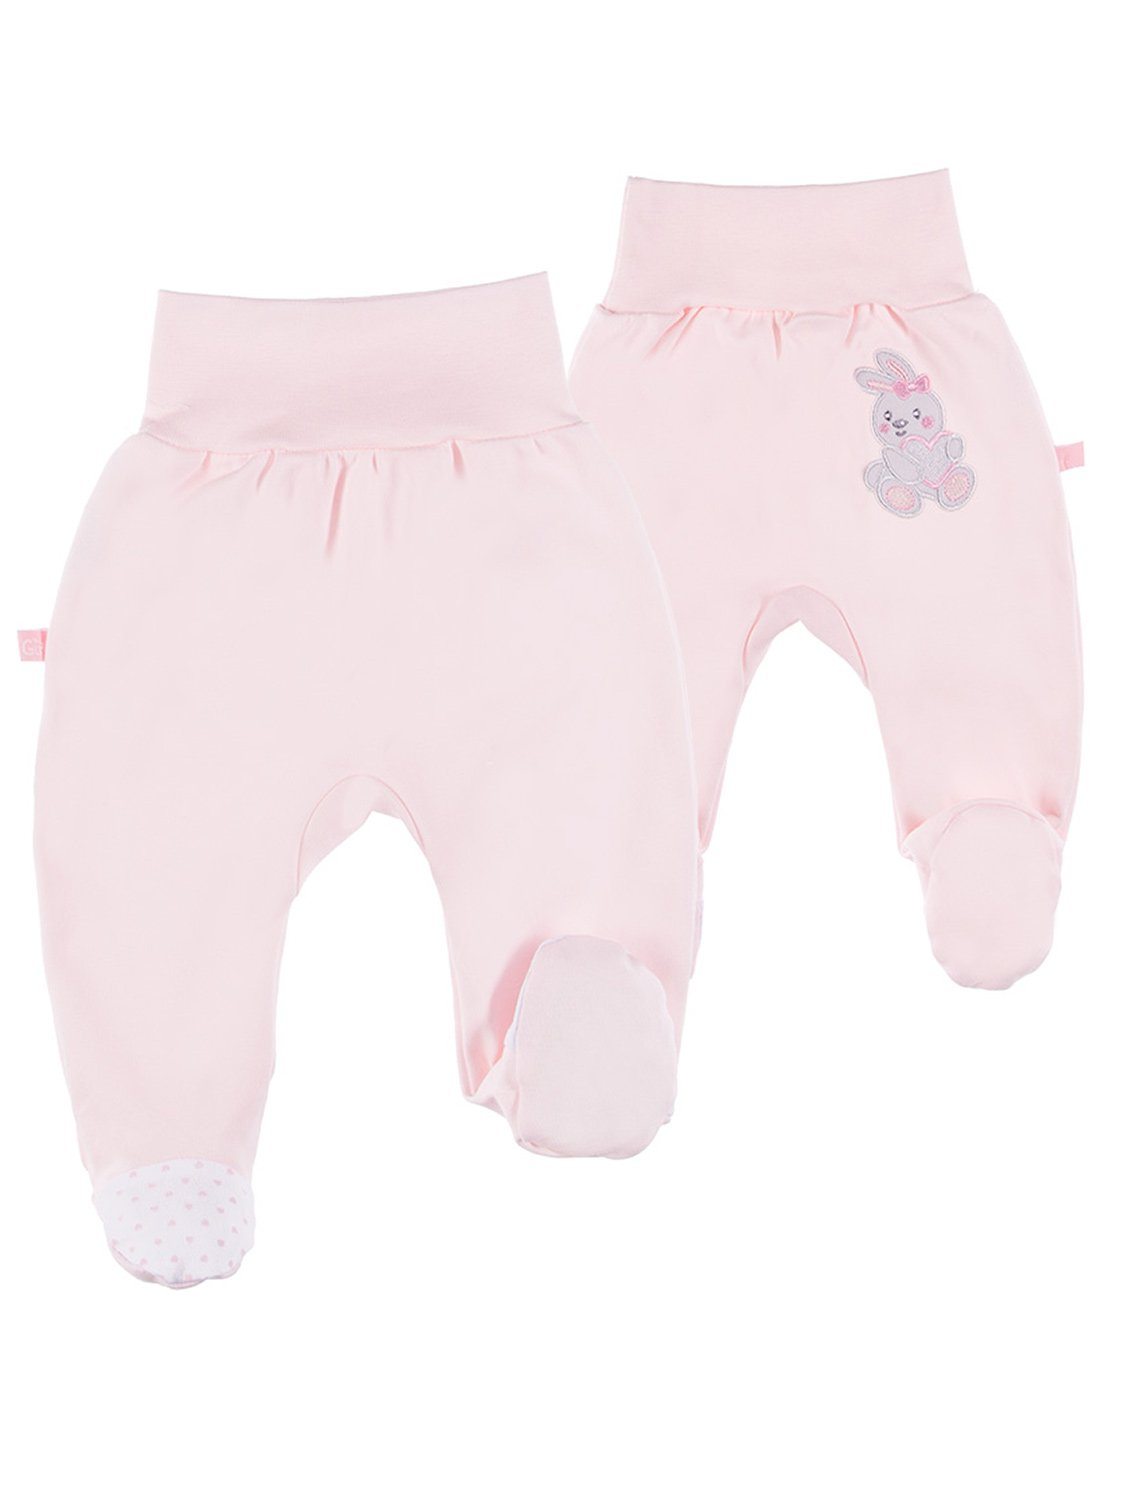 Early Baby Footed Trousers, Embroidered Bunny Rabbit On The Rear - Pink Trousers / Leggings EEVI 